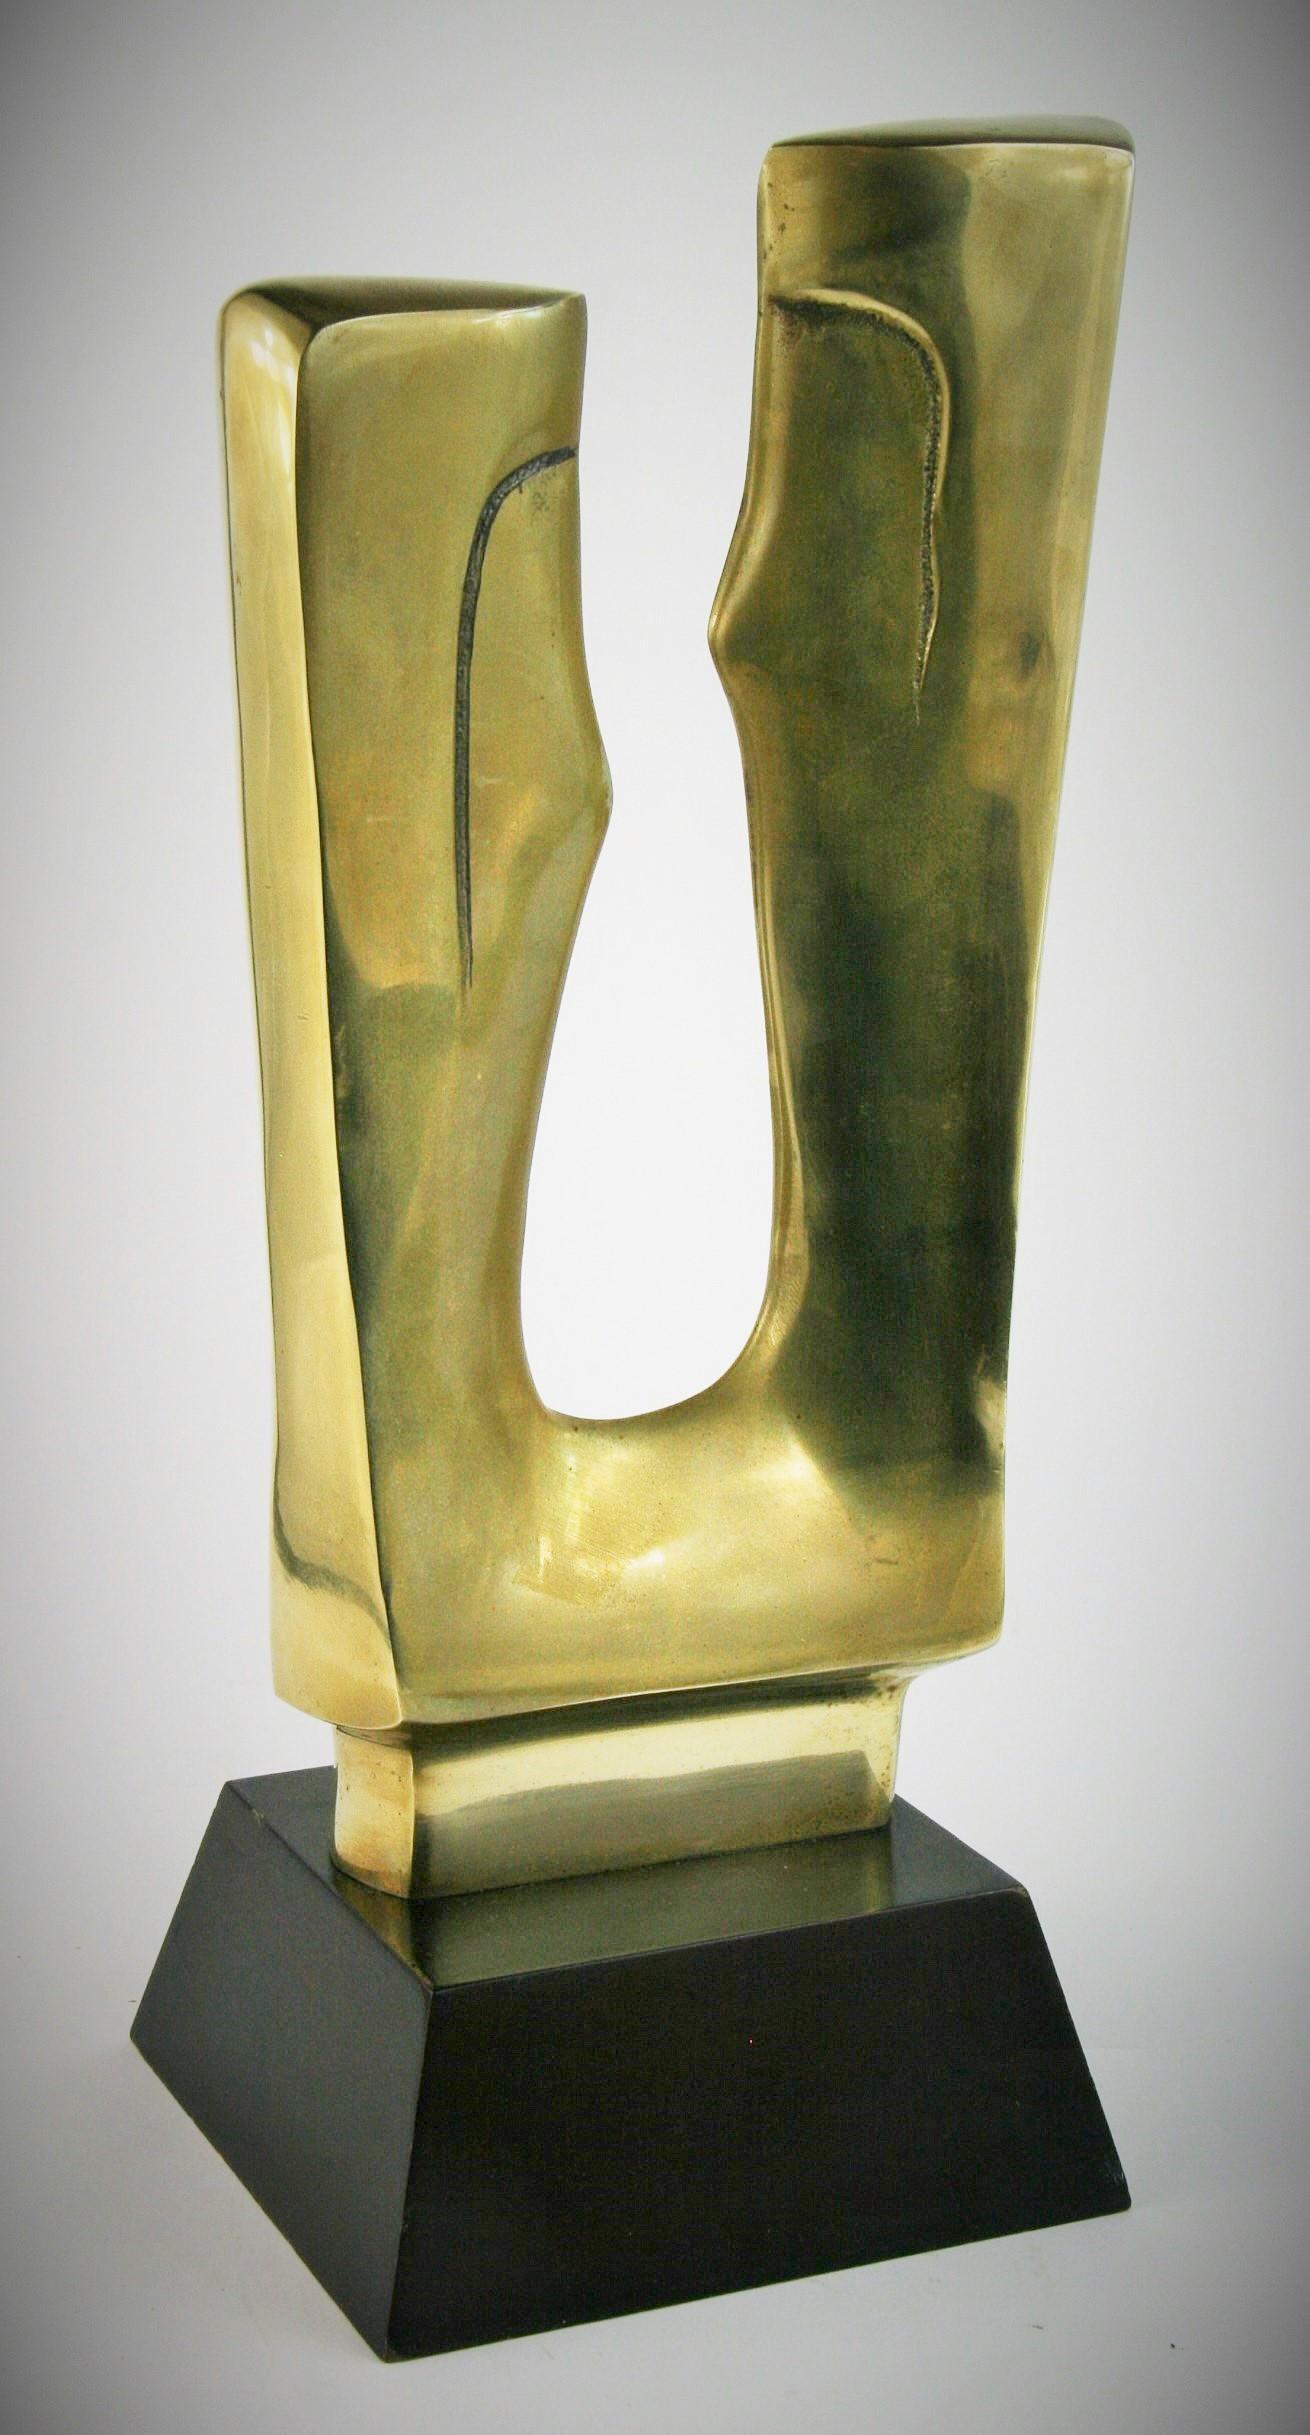 3-394 abstract brass sculpture on wood base.